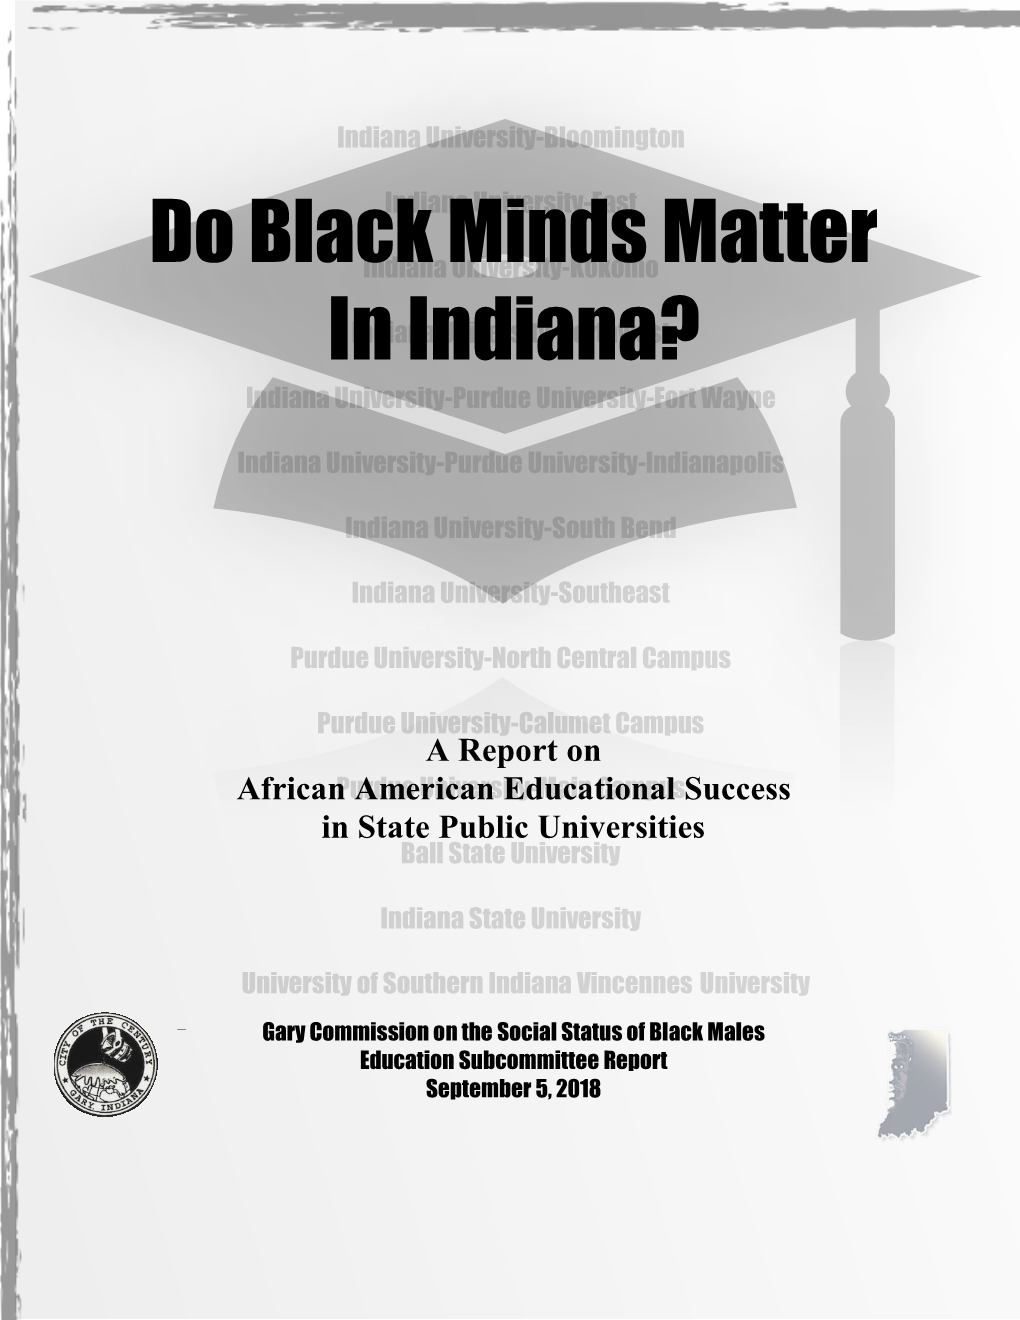 Do Black Minds Matter in Indiana?: a Report on African American Educational Success in State Public Universities